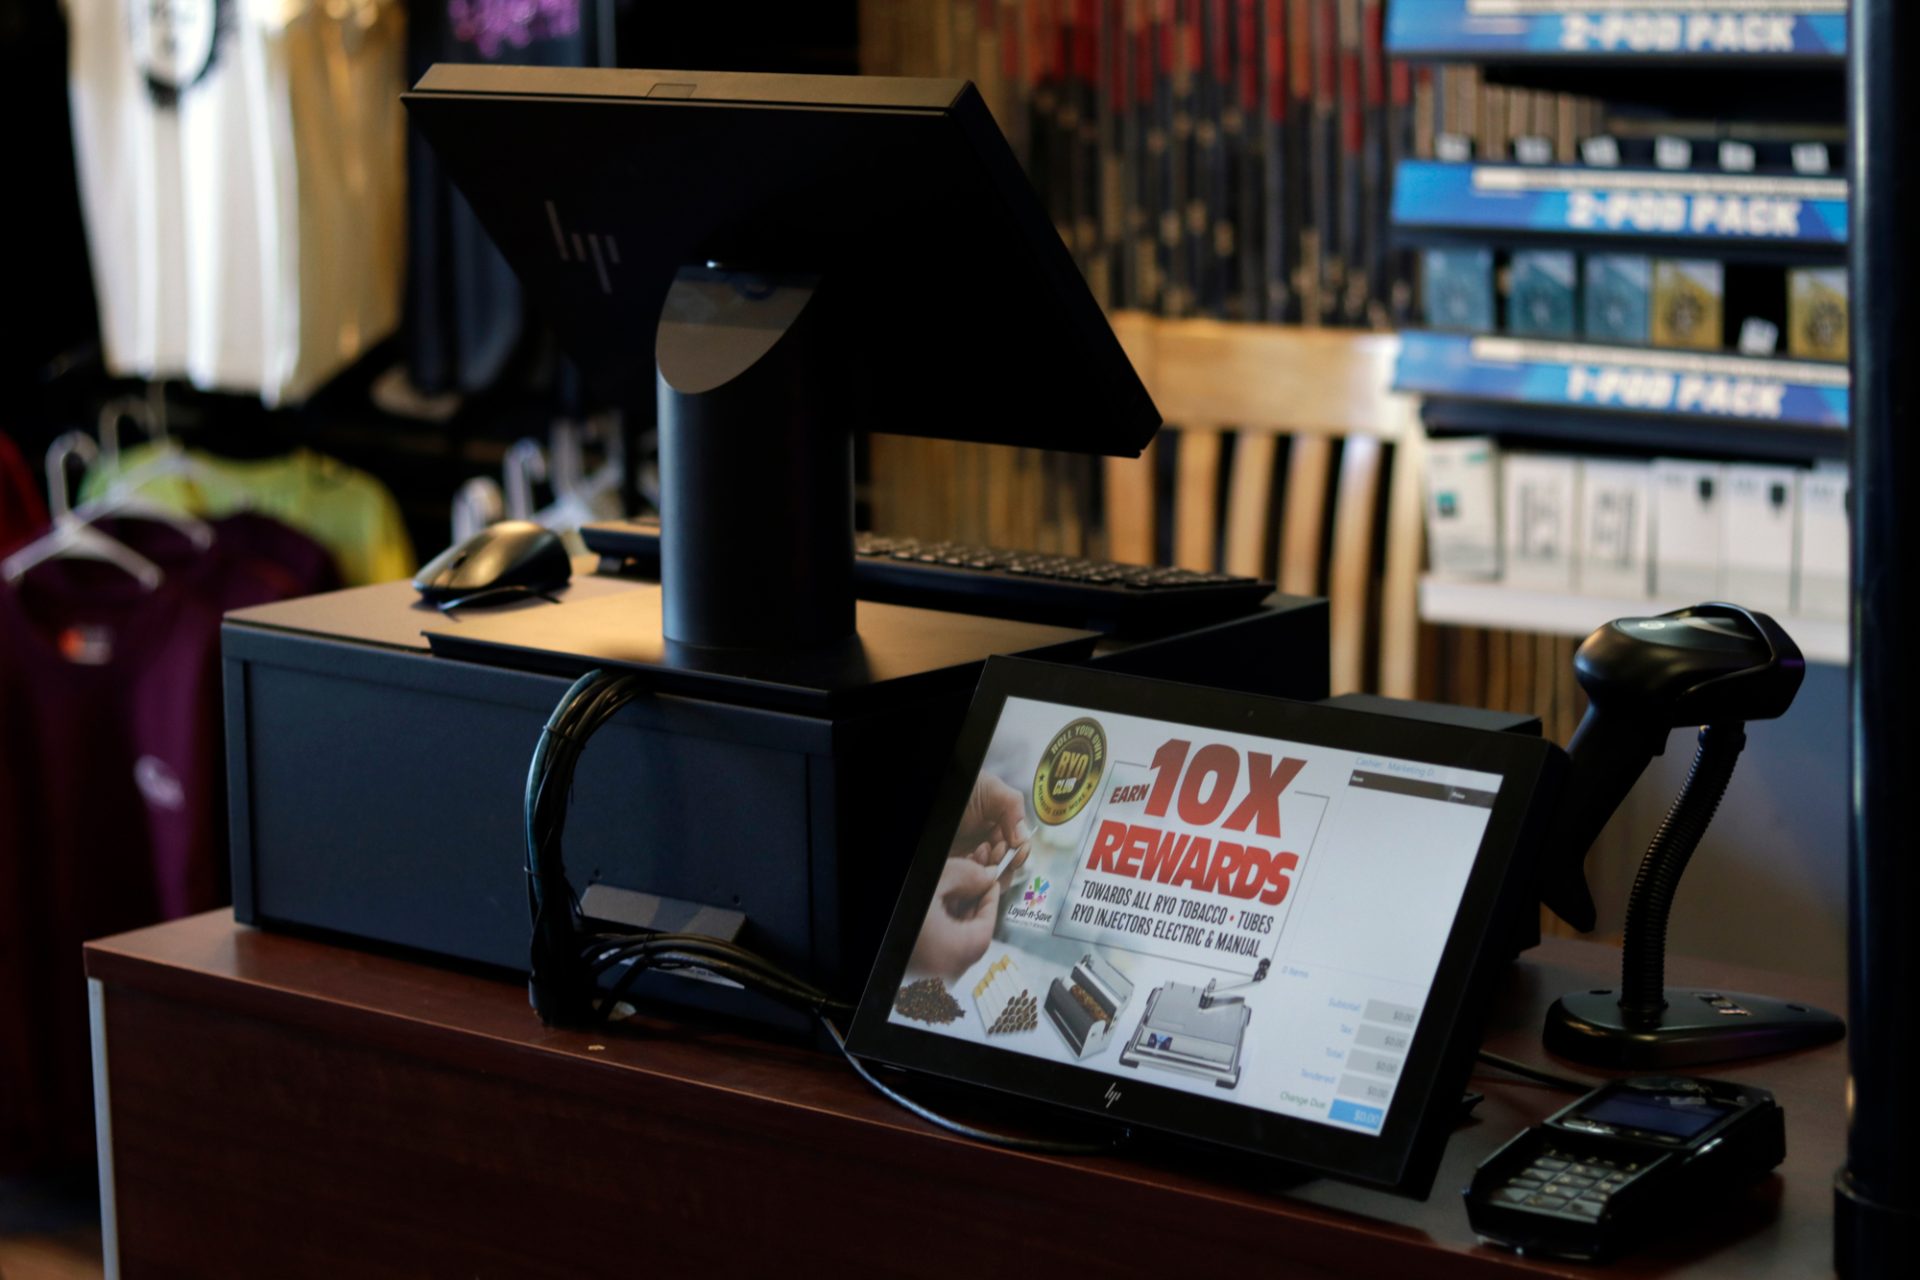 Screen of Tobacco Point-of-sale system